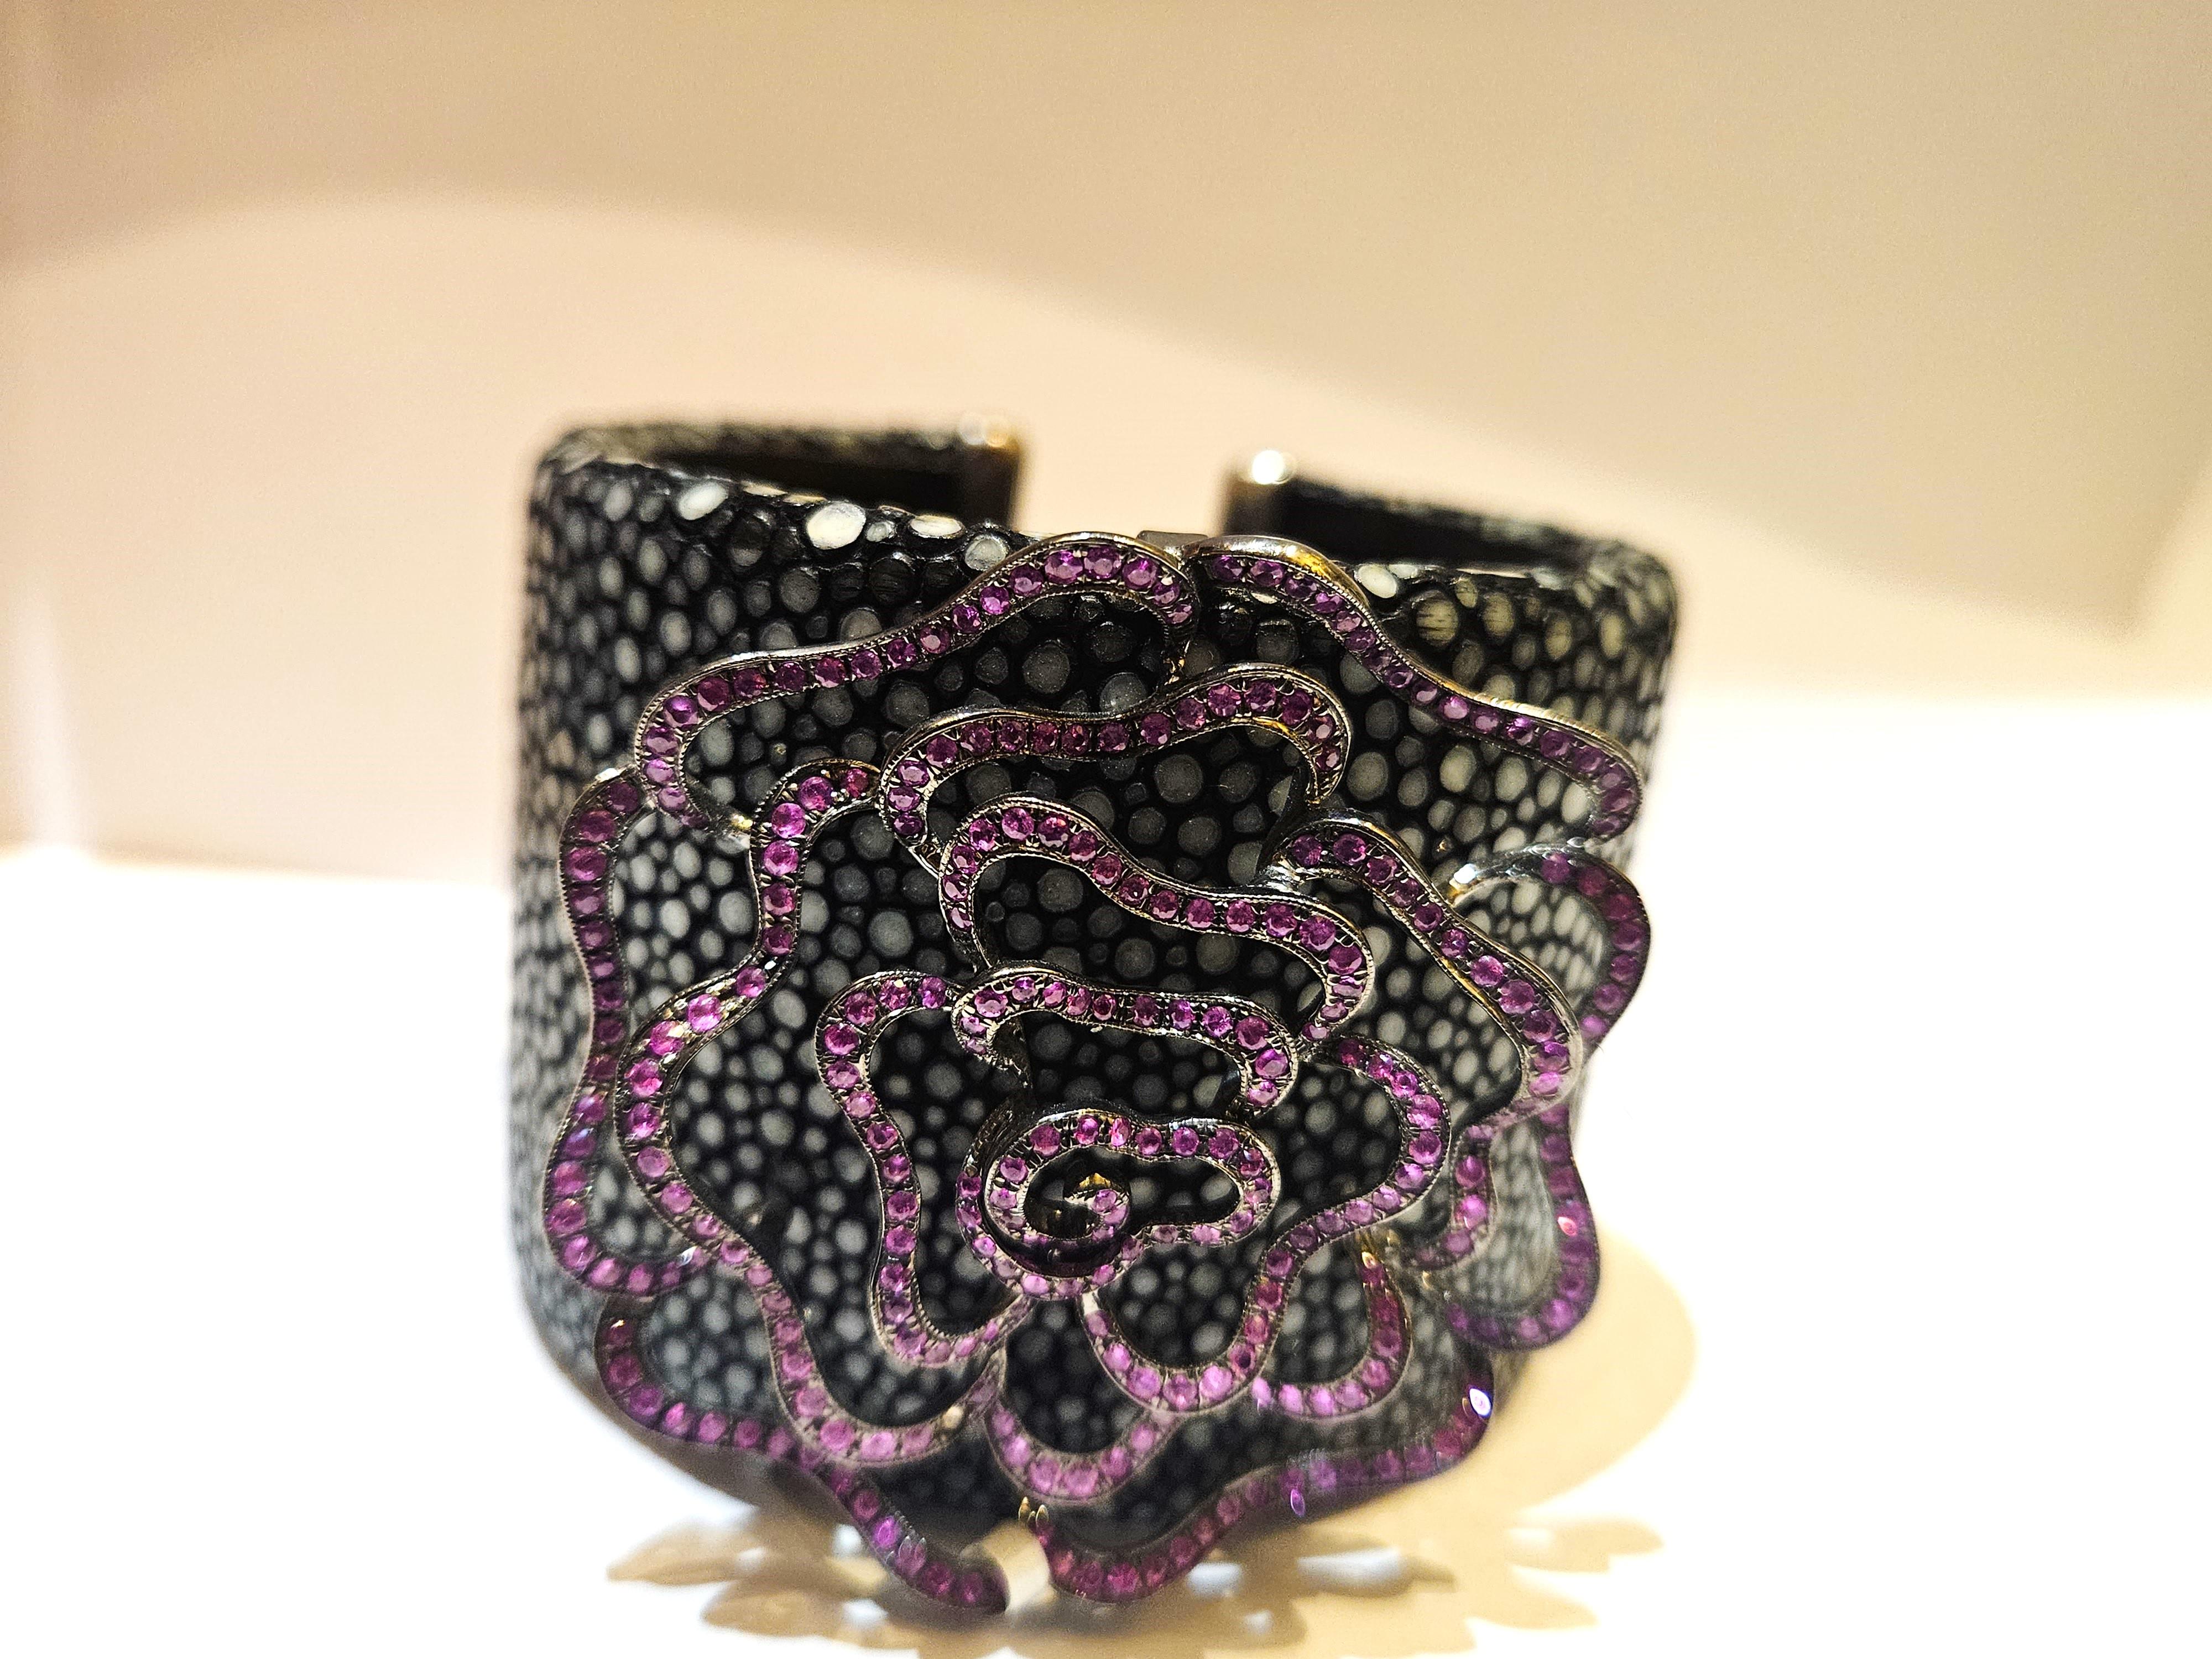 The Following Item we are offering is this Rare Magnificent FANCY PINK SAPPHIRE STINGRAY CUFF BANGLE BRACELET WITH APPROX 4CTS OF PINK SAPPHIRES!!! Taken out of a Private Collection. This Piece is a Rare Sample Piece that were sold in select Five